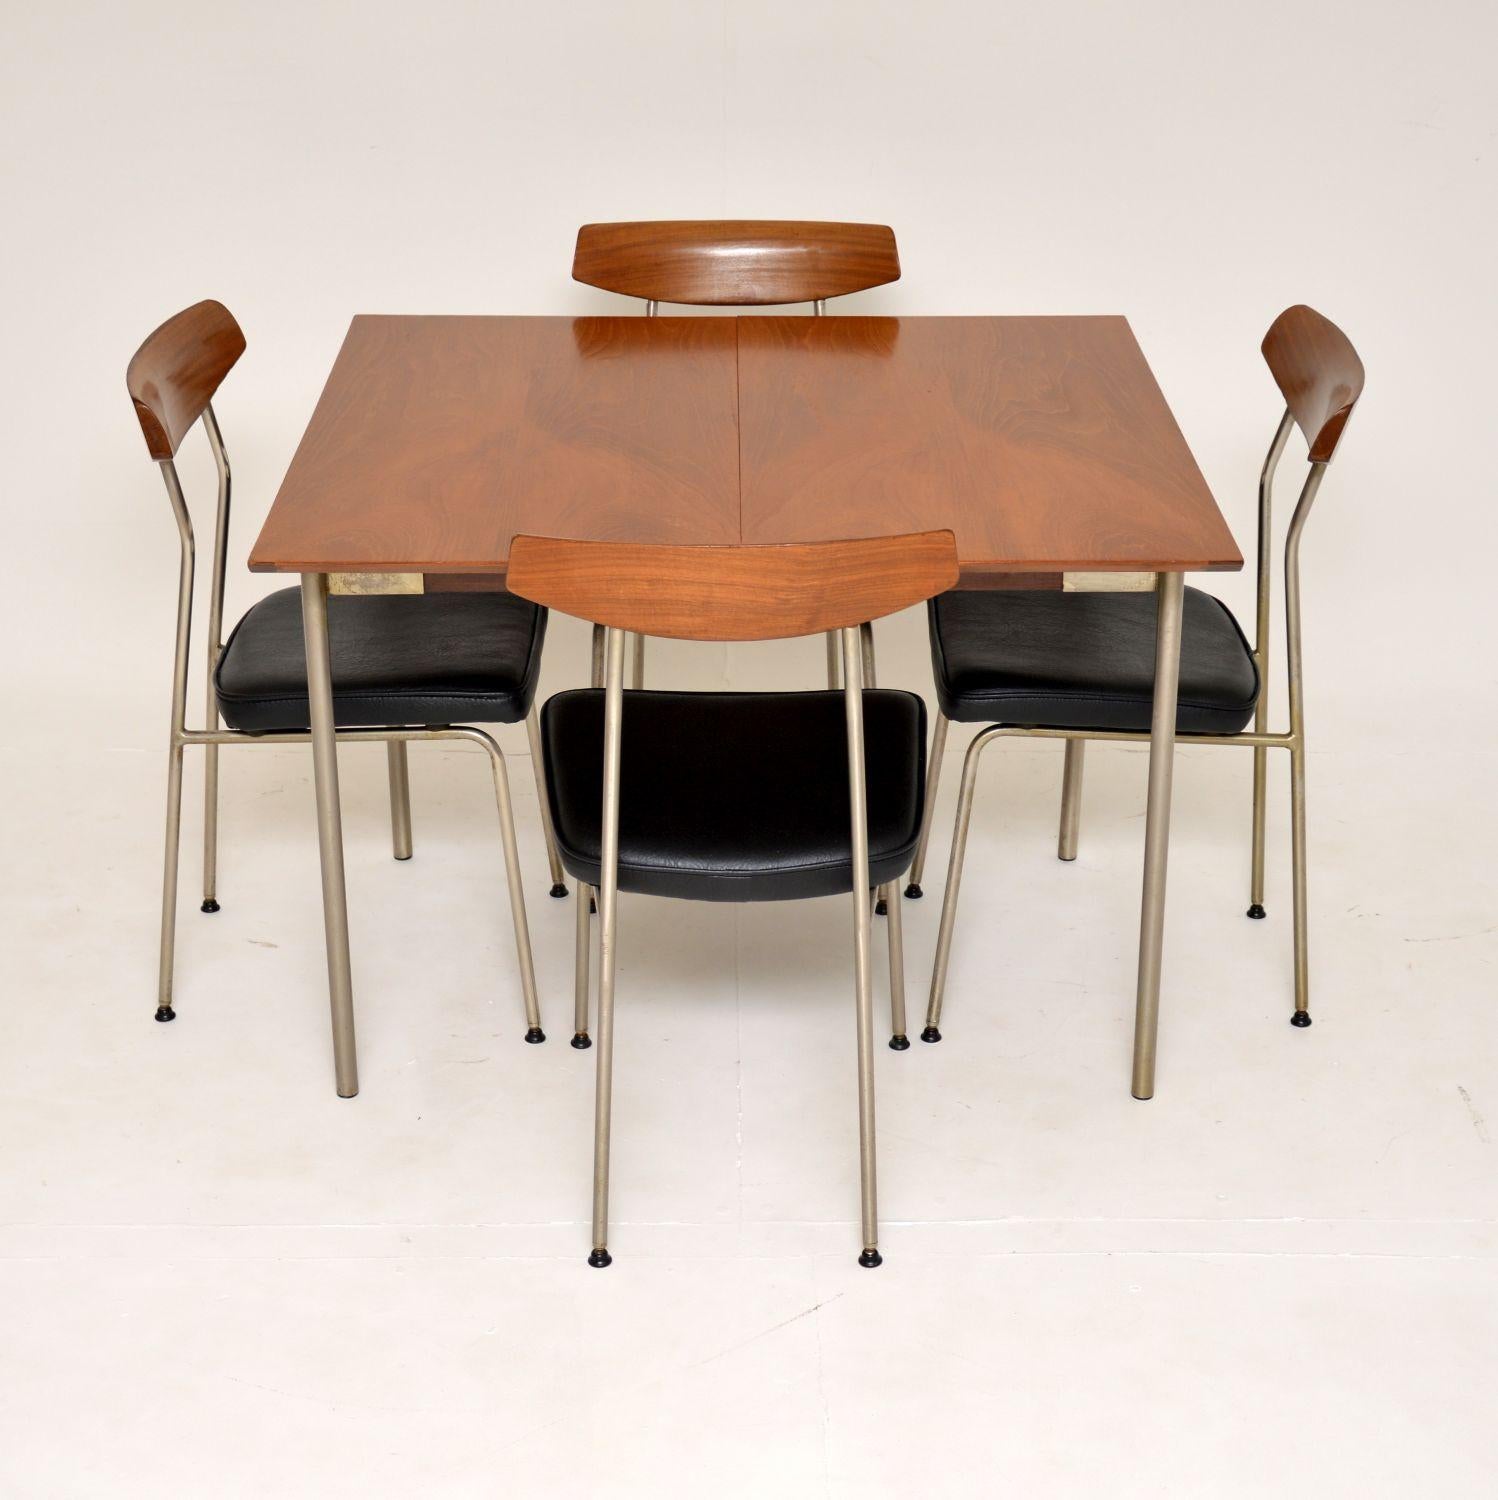 range table and chairs